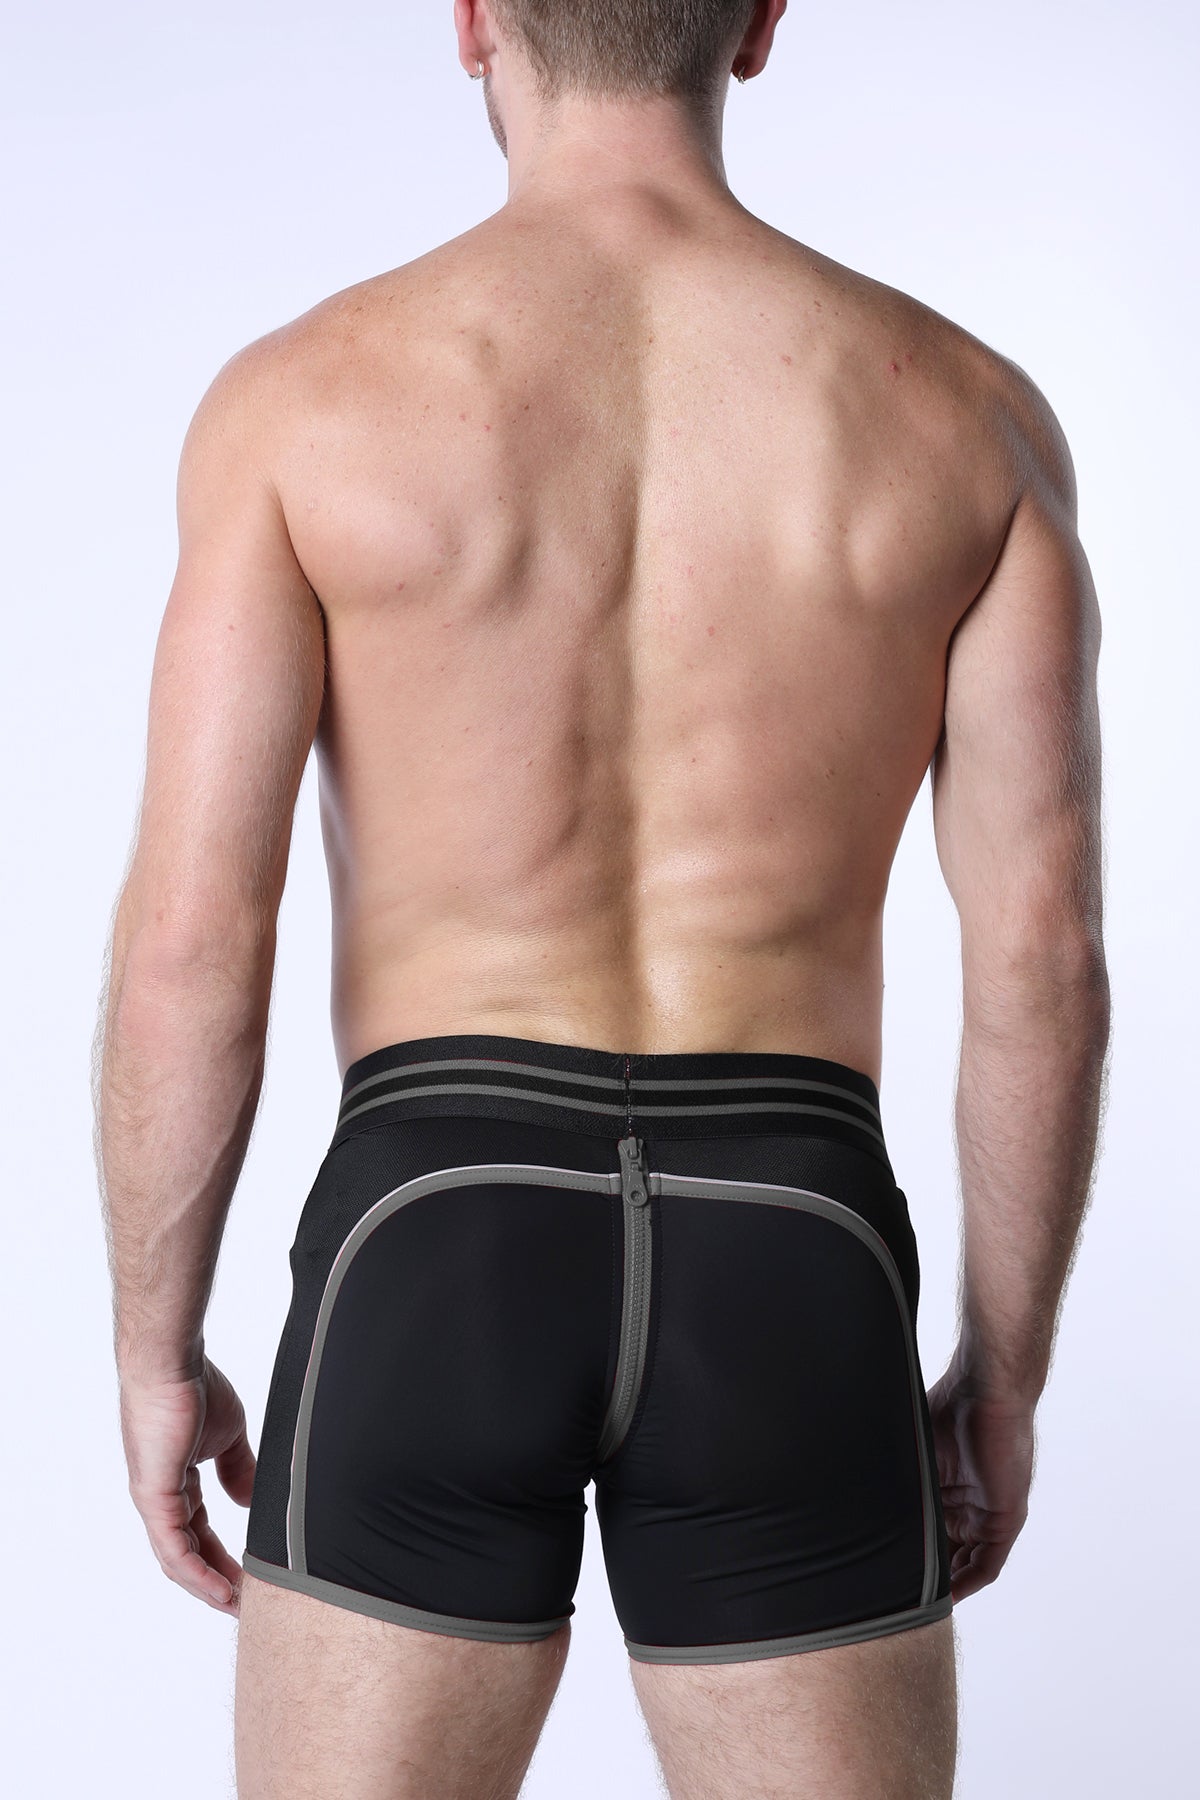 Cellblock 13 Mercury Neoprene Trunk with C-Ring, Removable Pouch and Rear Zipper